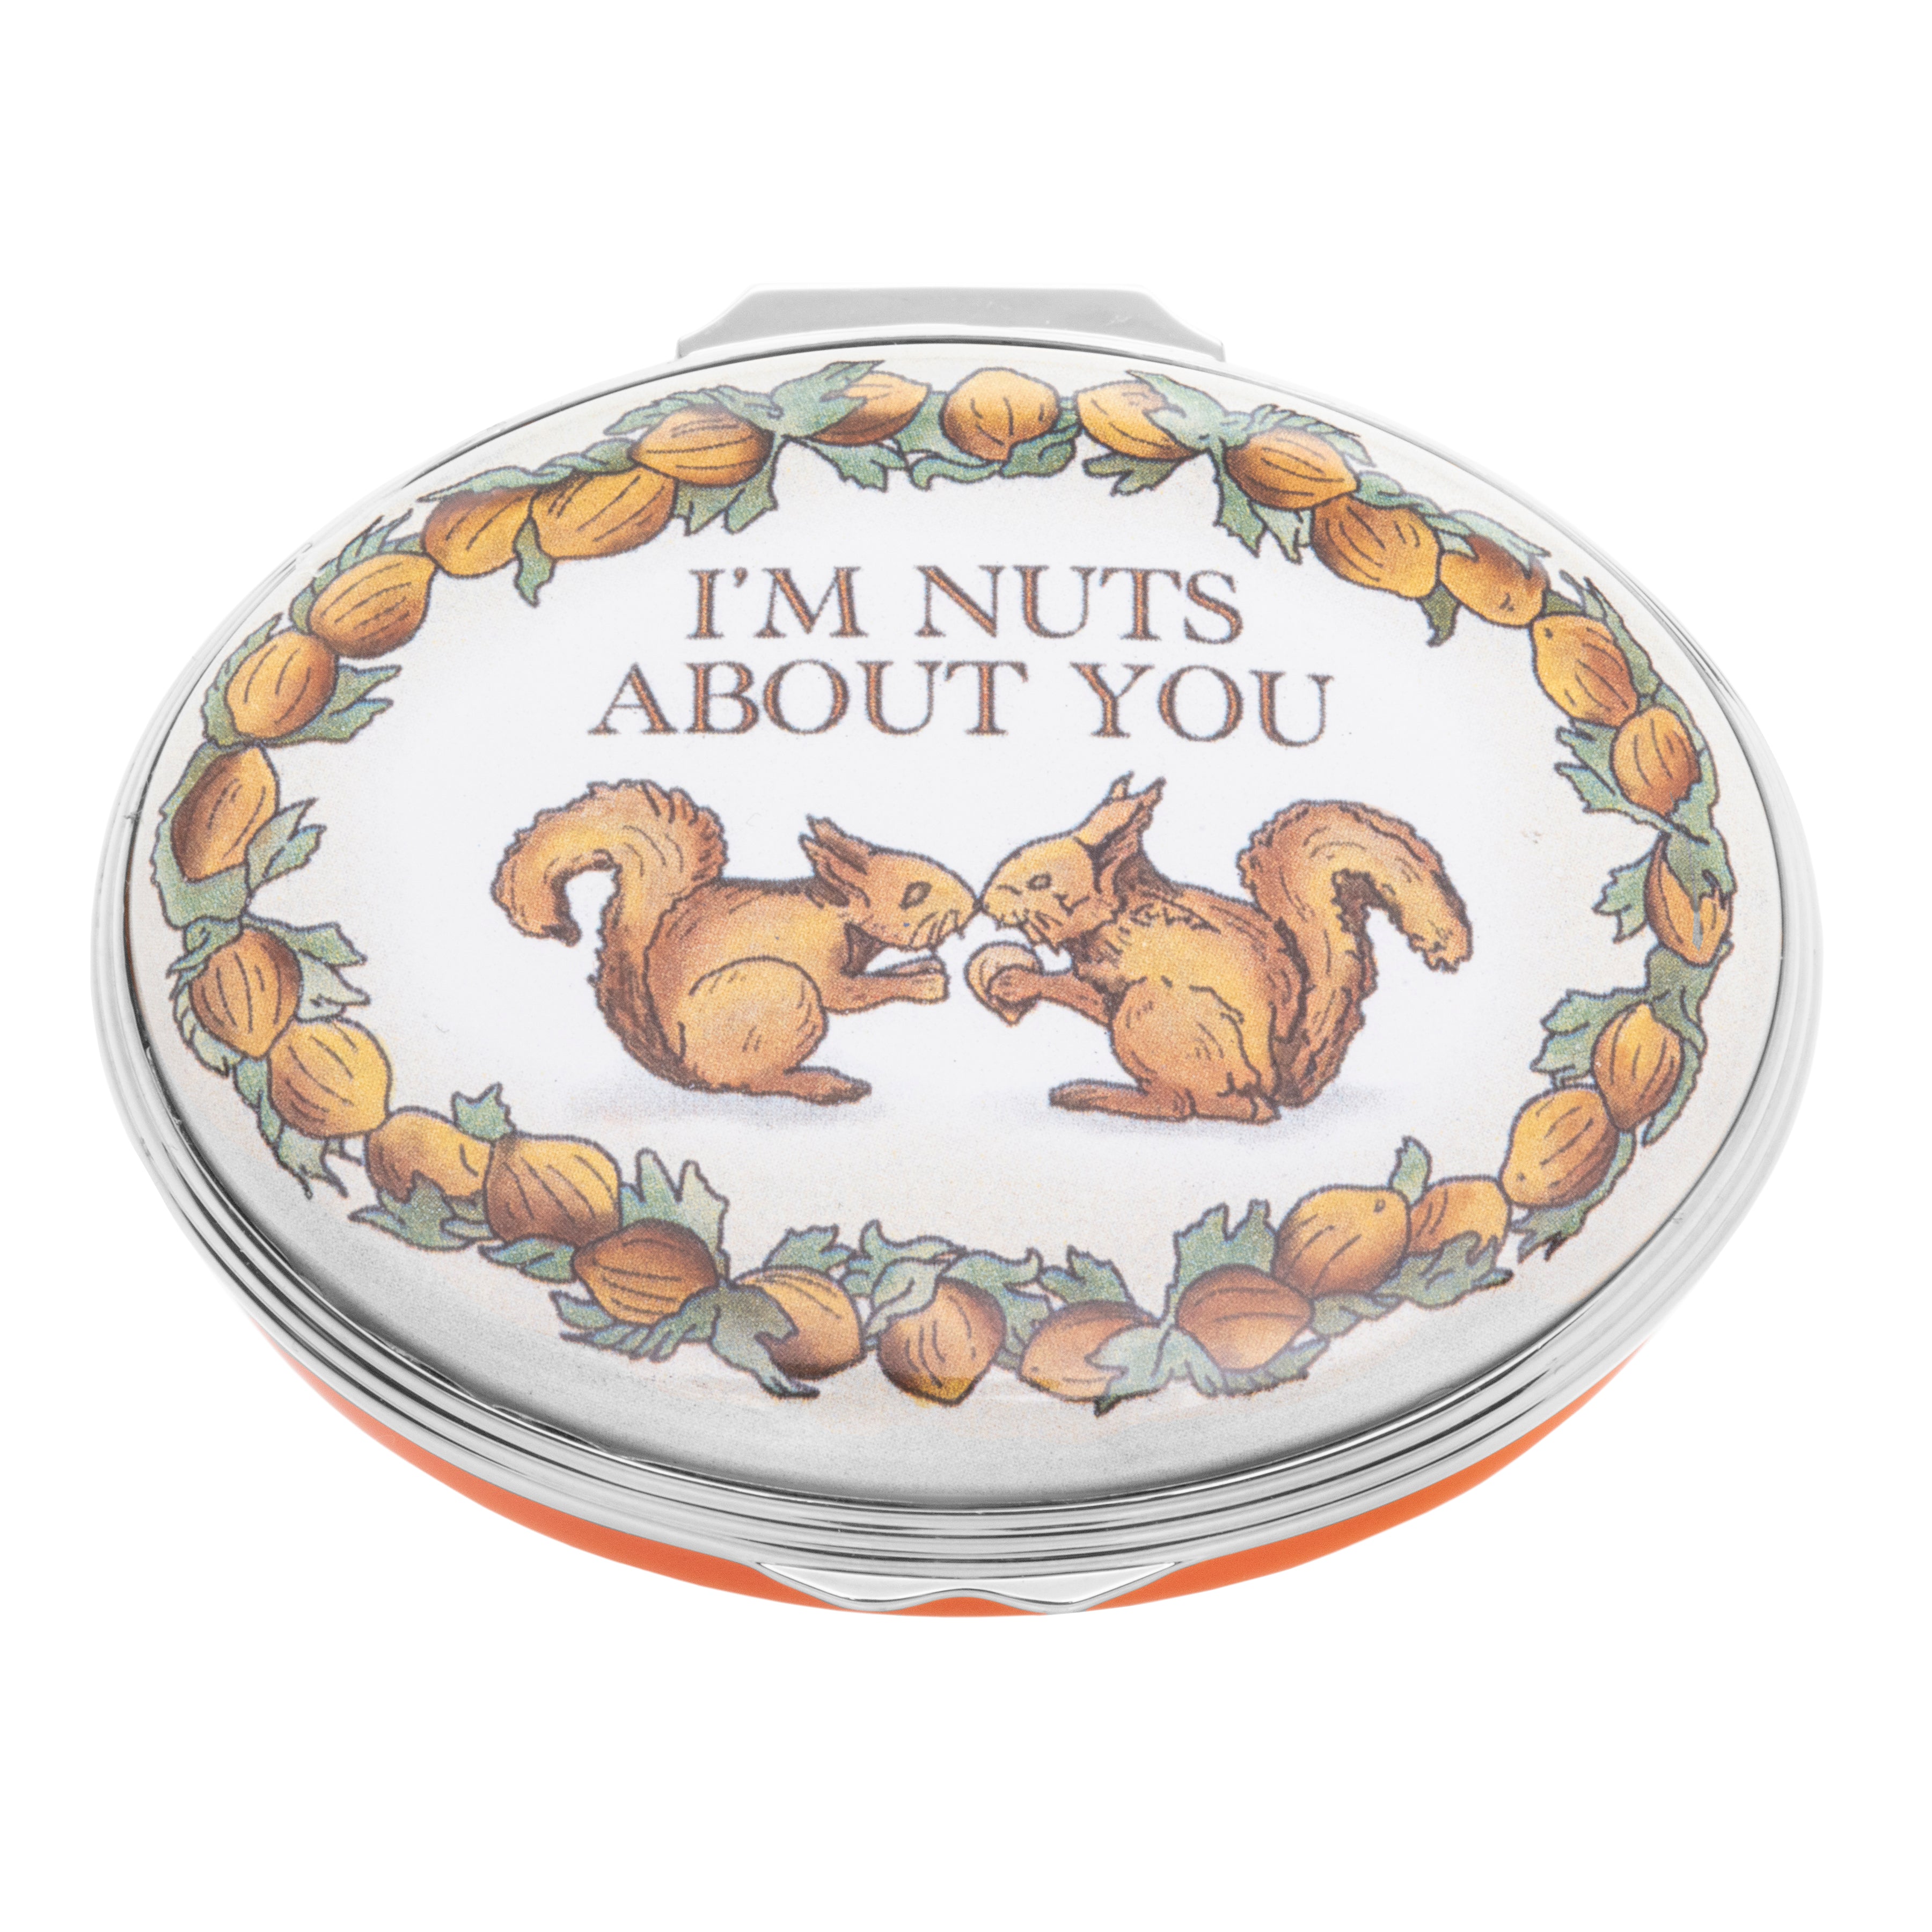 "I'm Nuts About You" Enamel Box